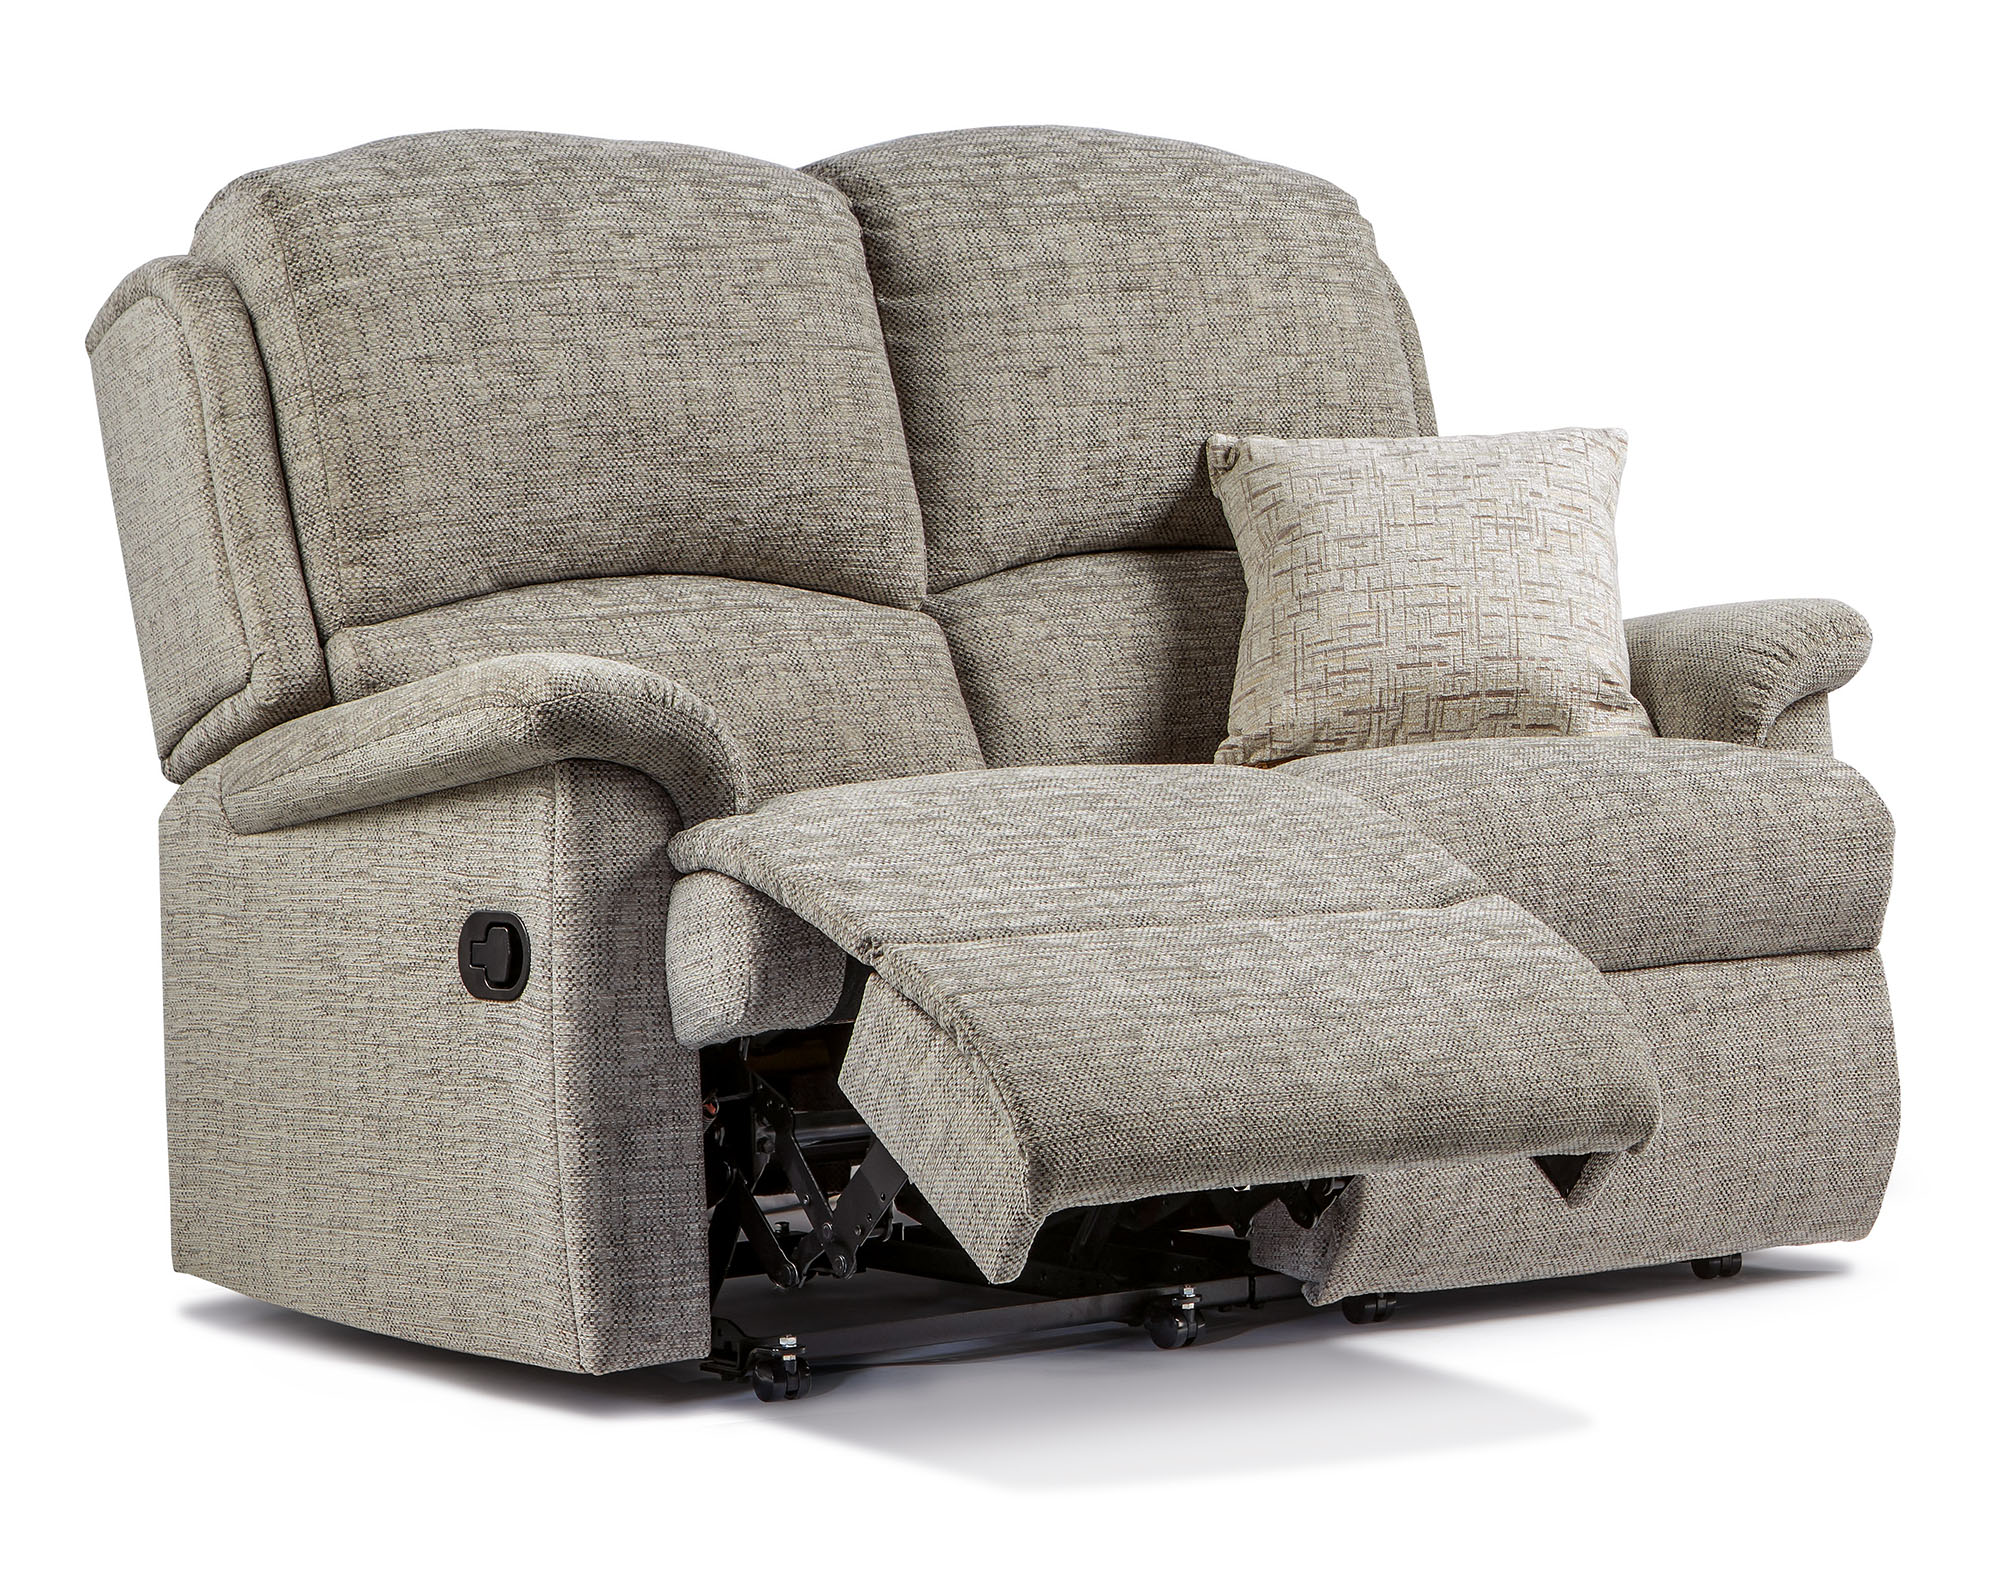 two seater recliner sofa bed